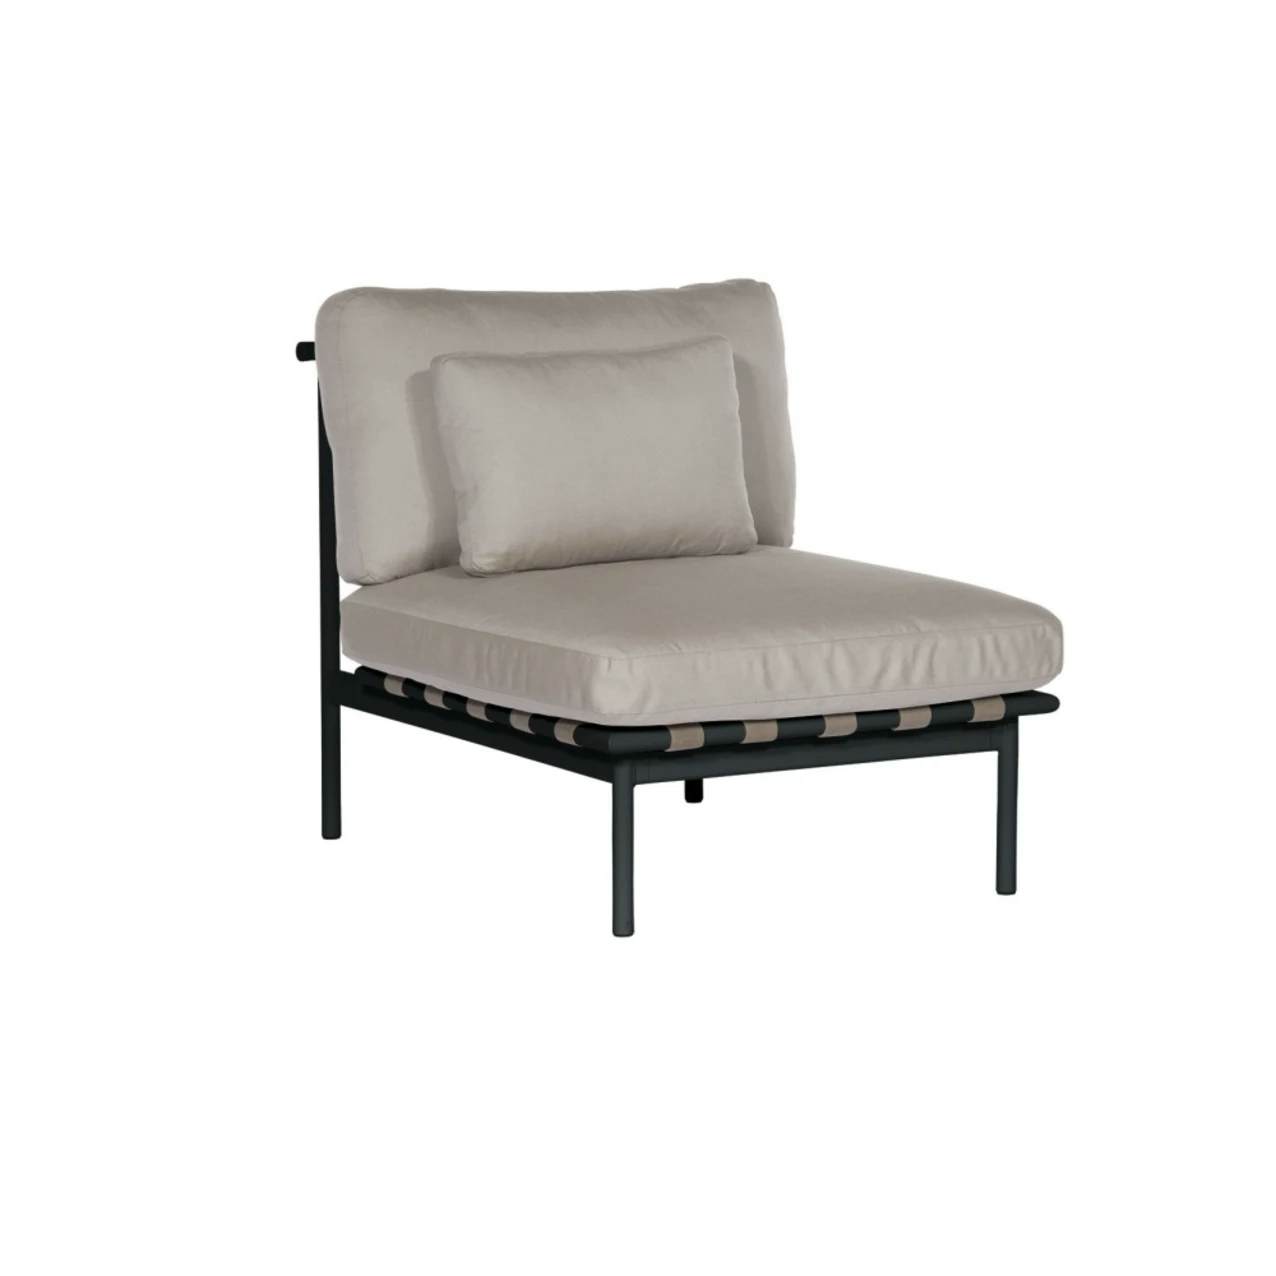 Barlow Tyrie Around Deep Seating Single Module - No Arms | Forge Grey Aluminum Frame